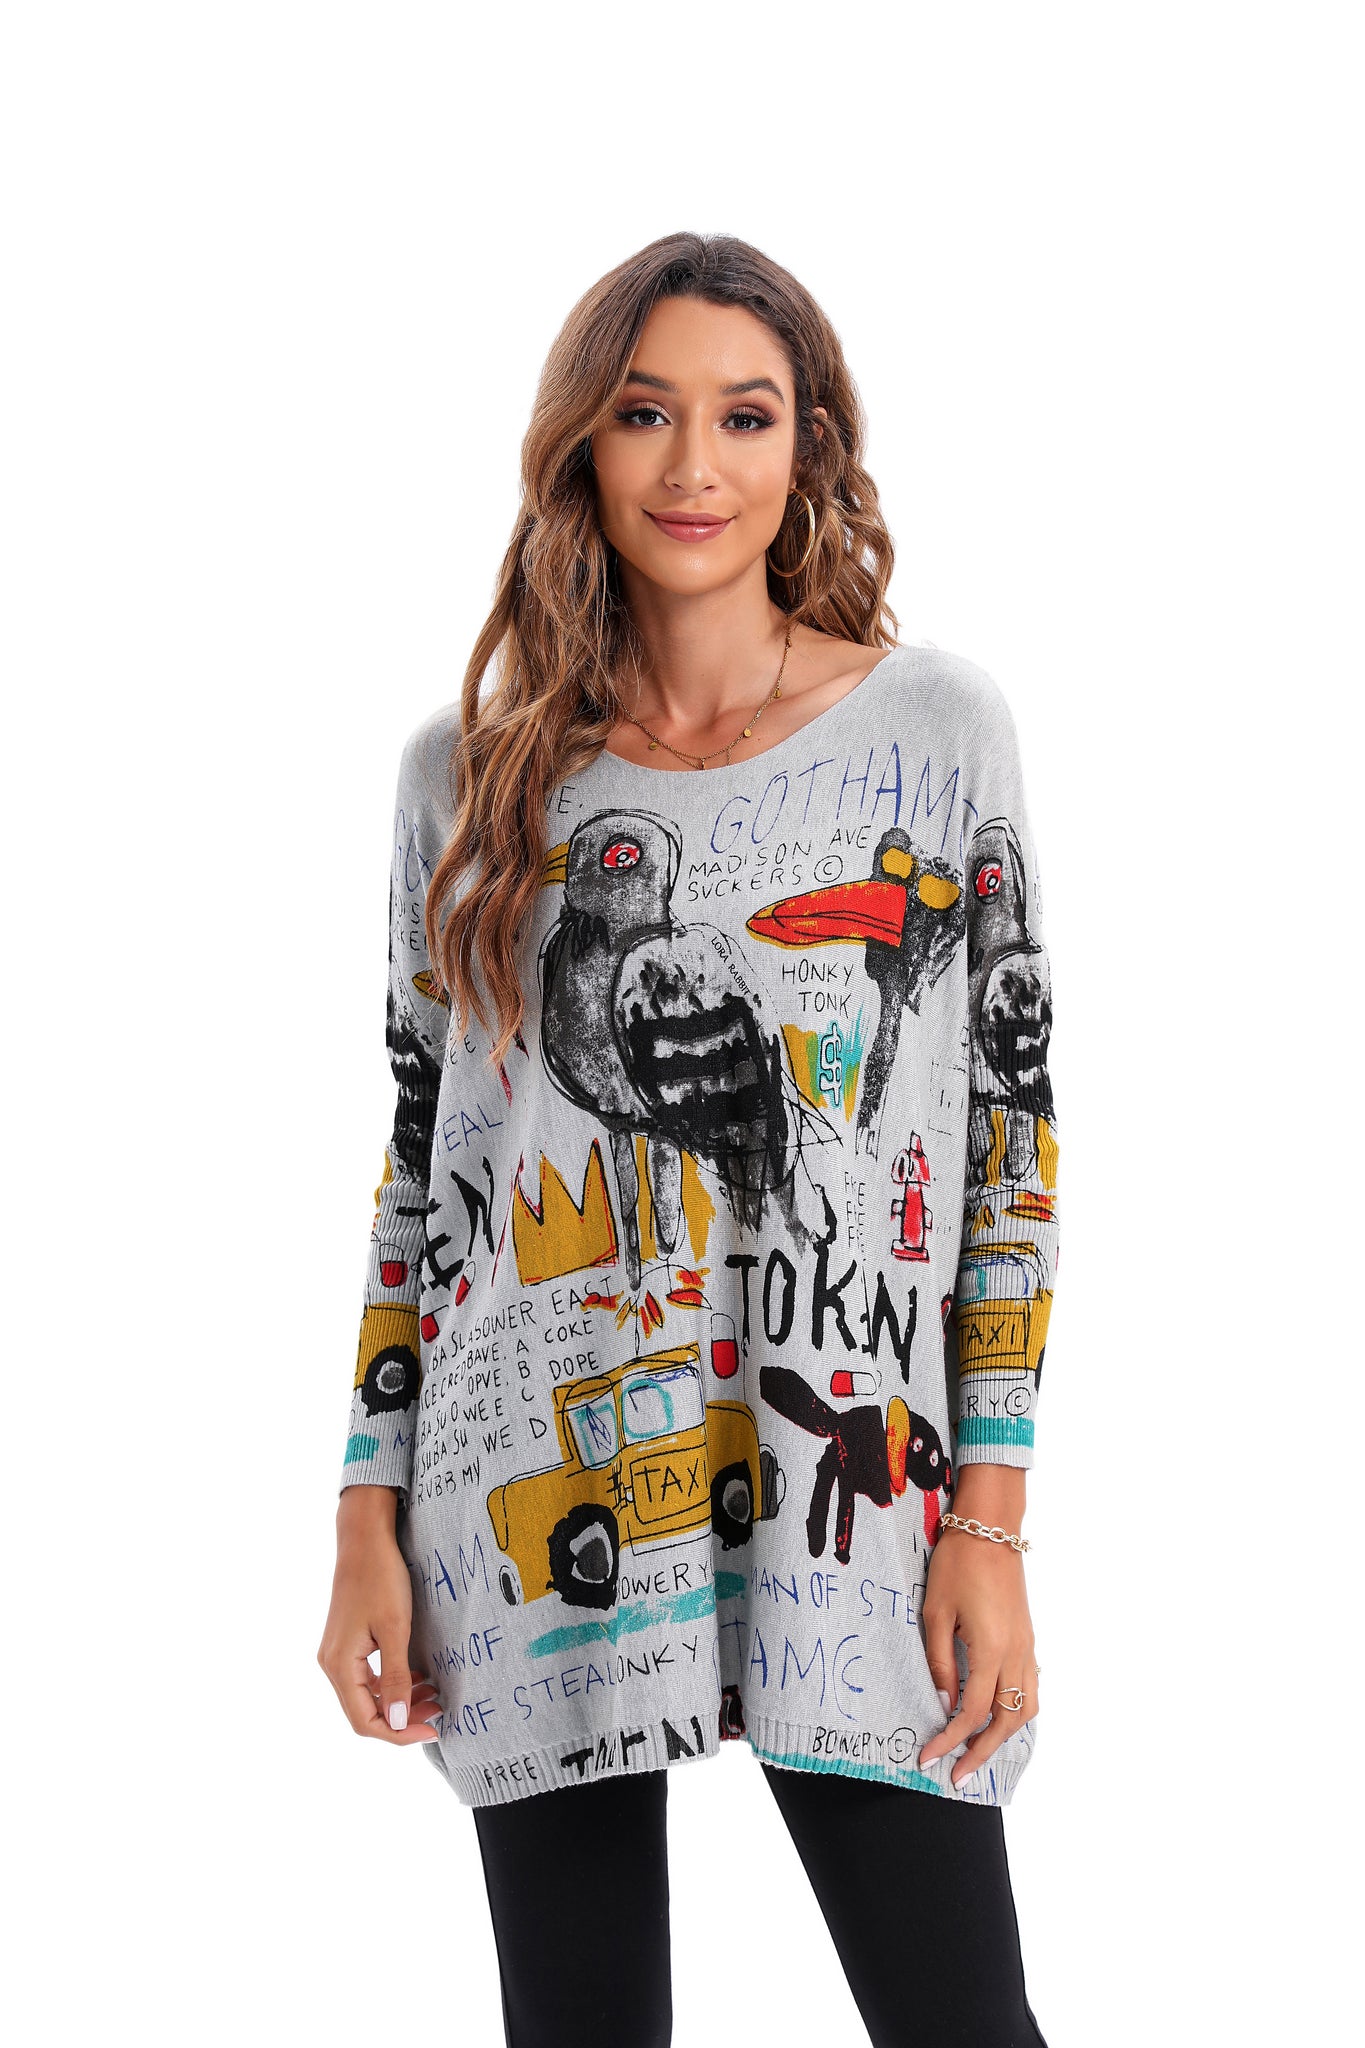  HUMMHUANJ Sweaters for Women Fashion Print Long Casual Flannel  Sweater for Women Long Sleeve Dress Shirt Women Under 20 Dollars Outlet  Deals Overstock Clearance Lime : Clothing, Shoes & Jewelry